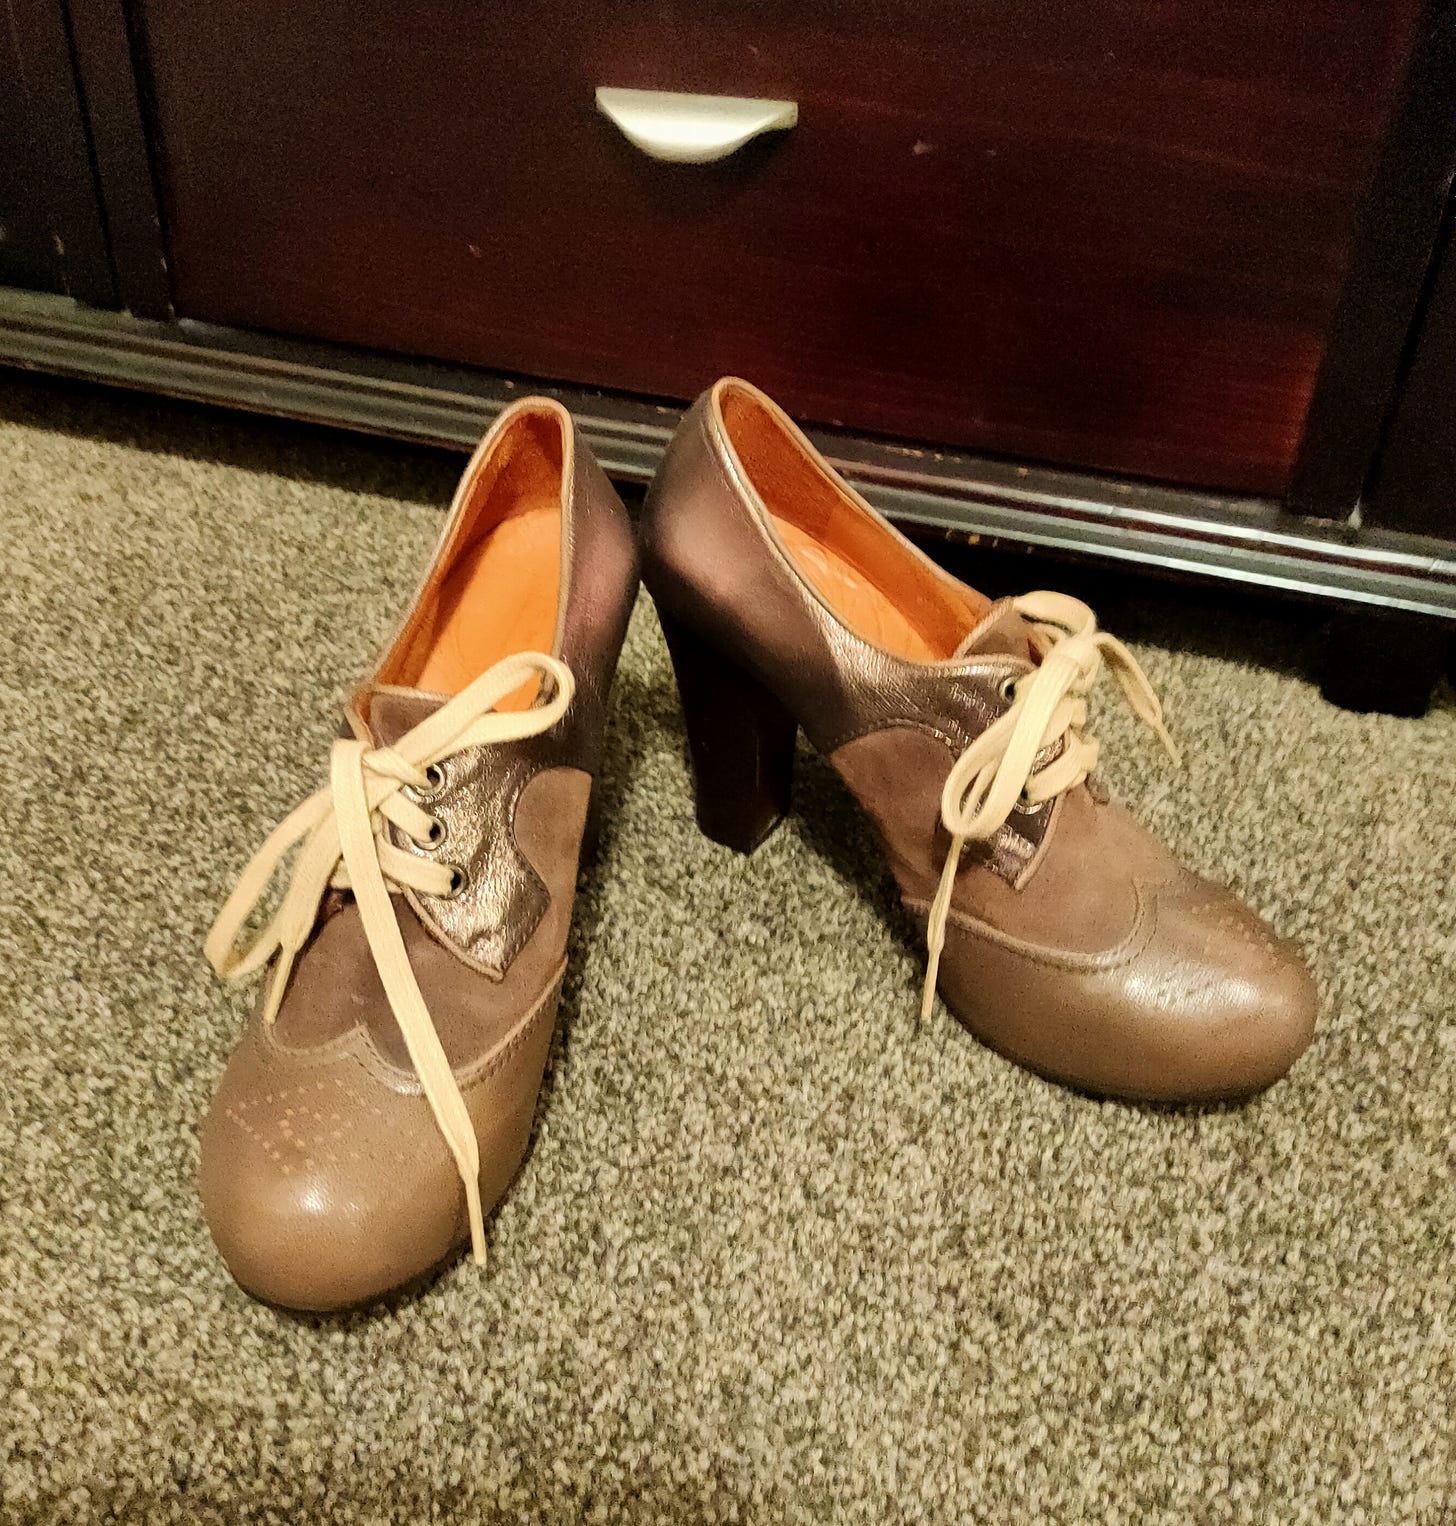 High-heeled brogues in brown and bronze leather, brown suede, and light tan shoelaces. They look like a pair of sensible shoes turned 40 and decided to do whatever the hell they want, but still be comfortable because honestly they're old enough to appreciate the joys of a nice cup of tea and a 10pm bedtime.